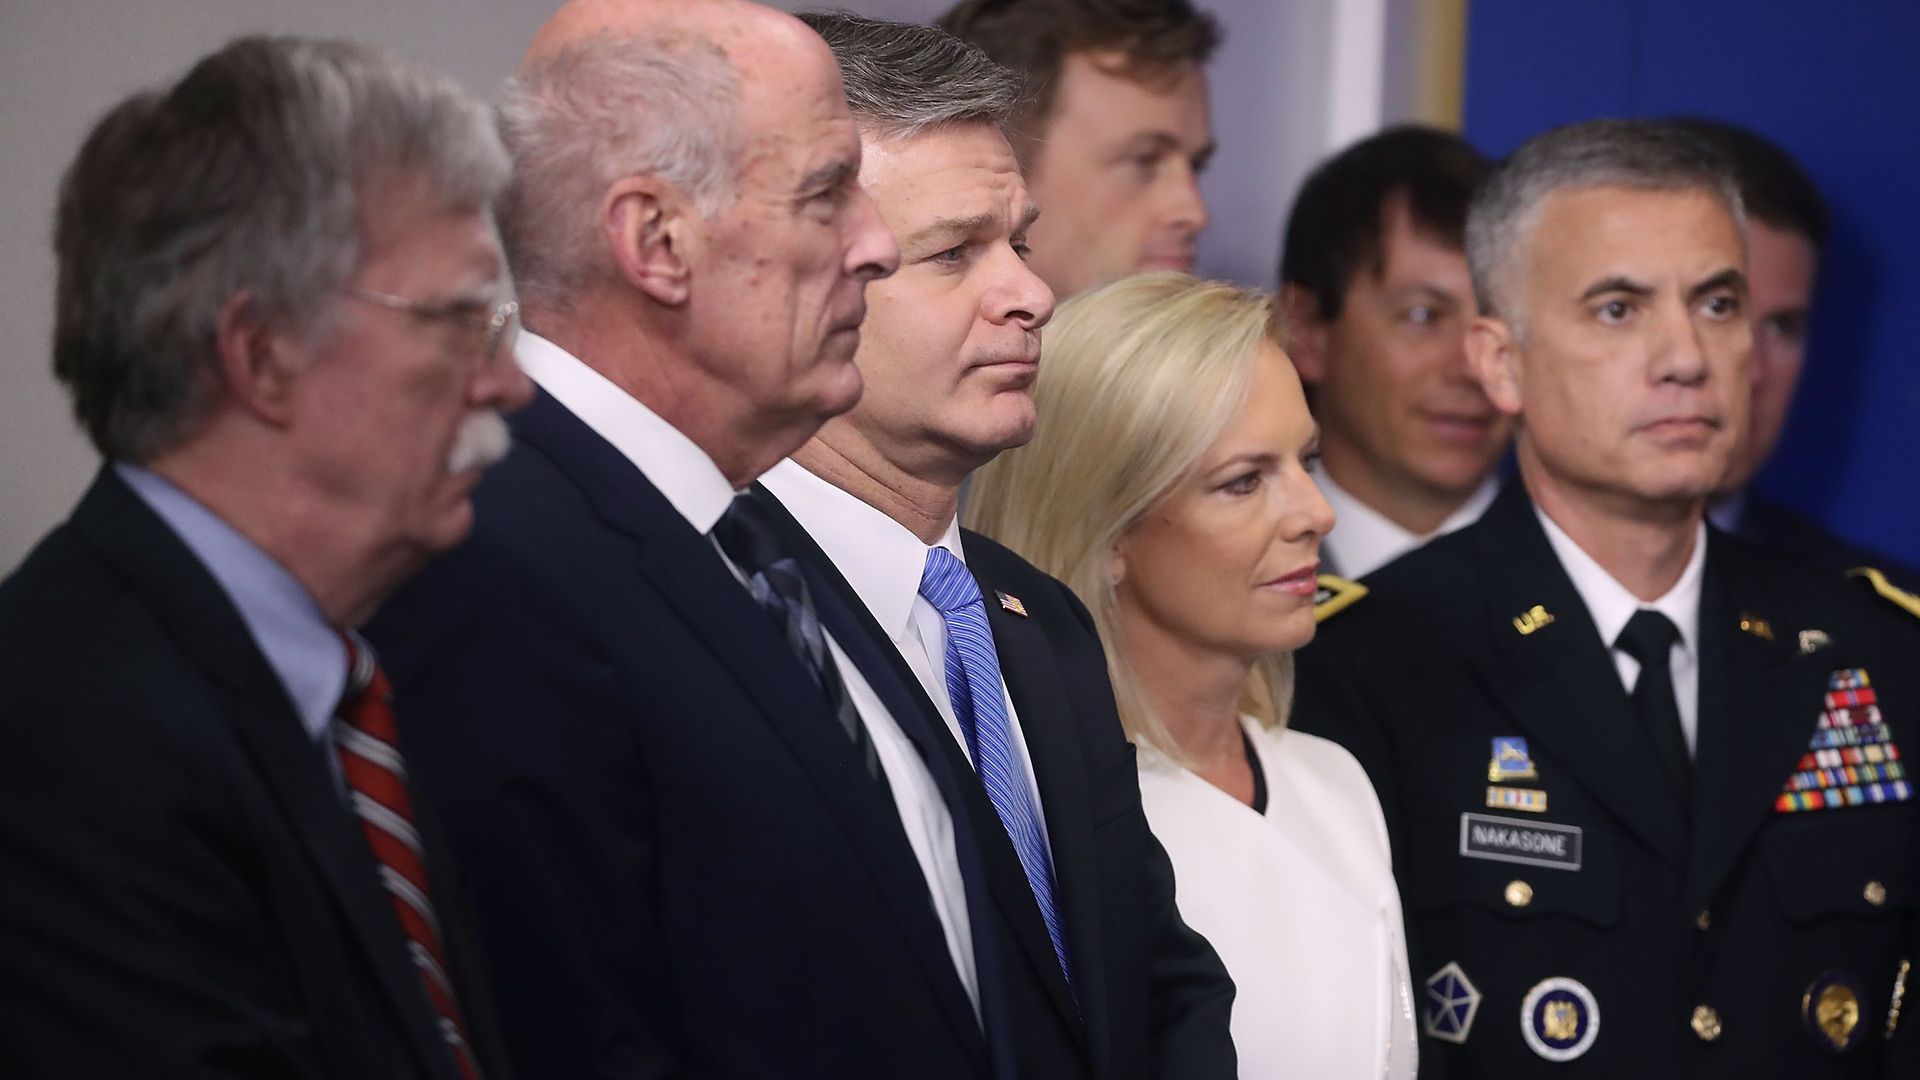 This photo shows top U.S. intelligence officials standing in the White House